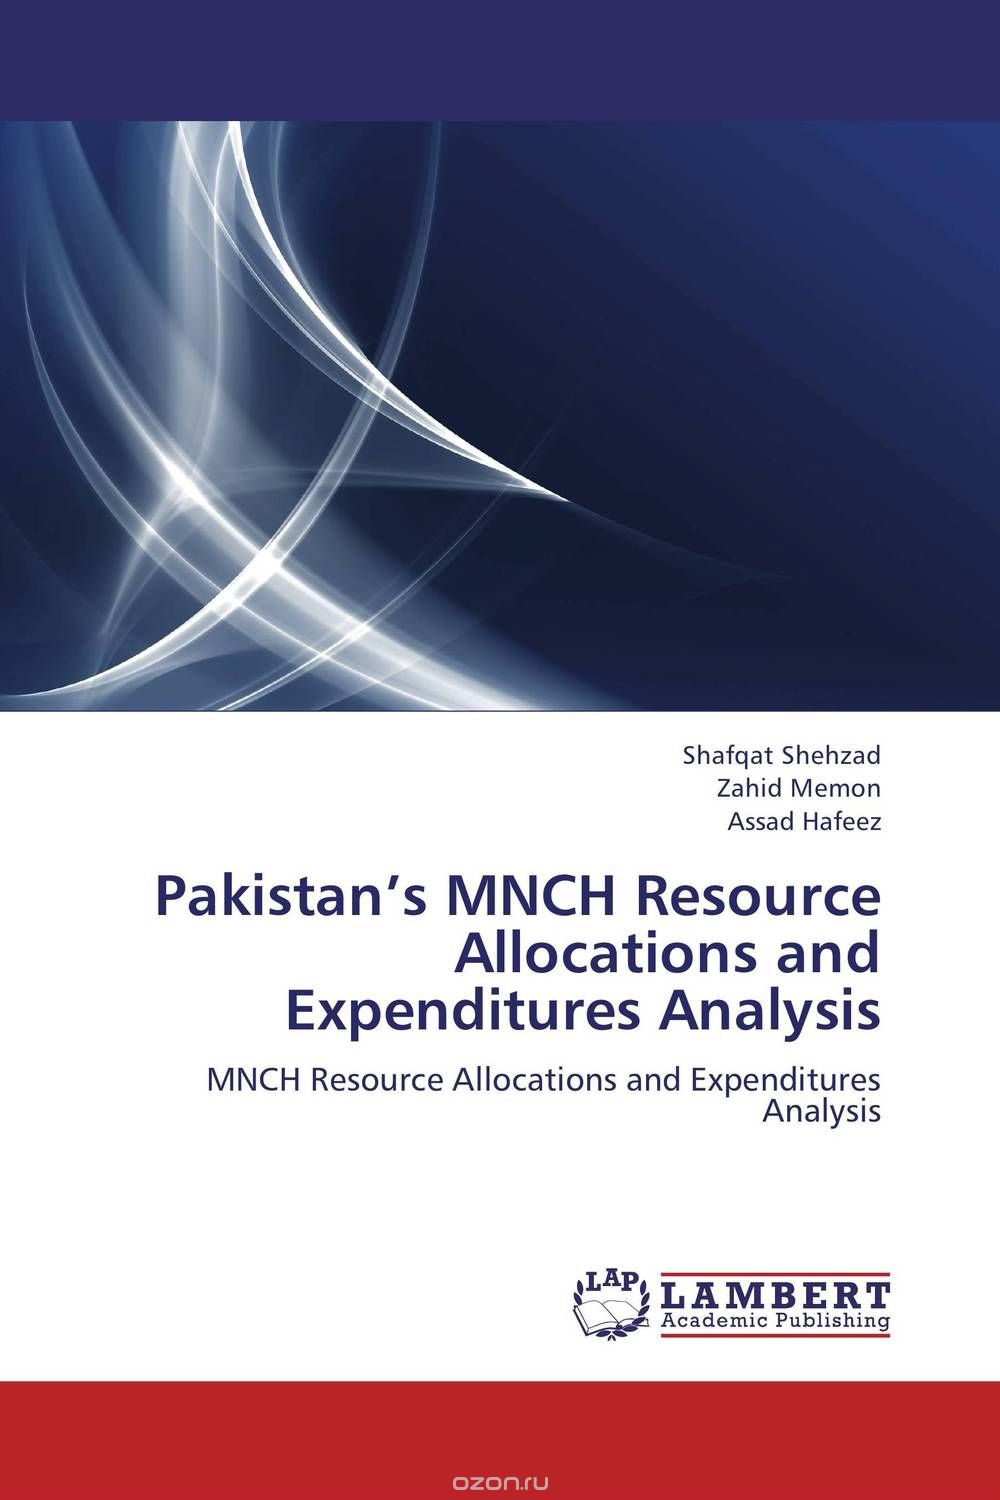 Pakistan’s MNCH Resource Allocations and Expenditures Analysis